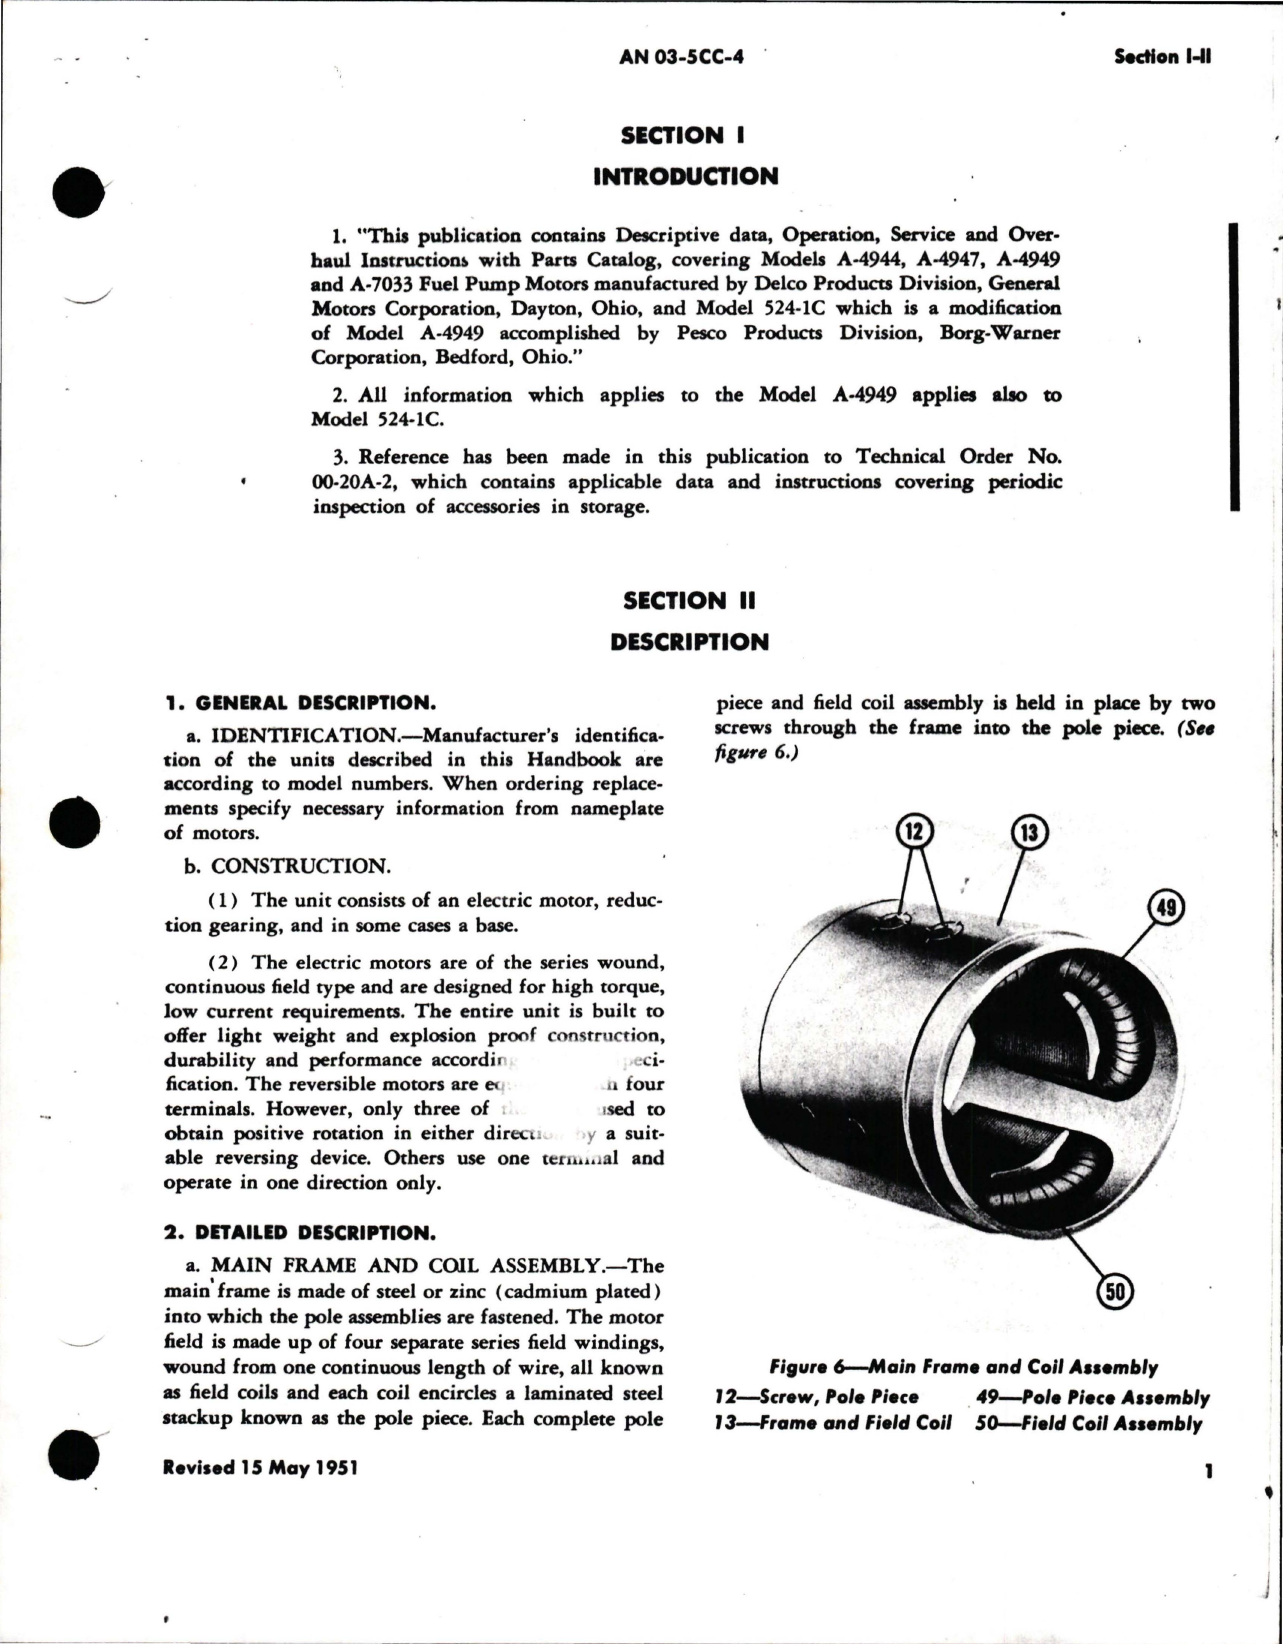 Sample page 9 from AirCorps Library document: Operation, Service and Overhaul Instructions with Parts for Fuel Pump Motors